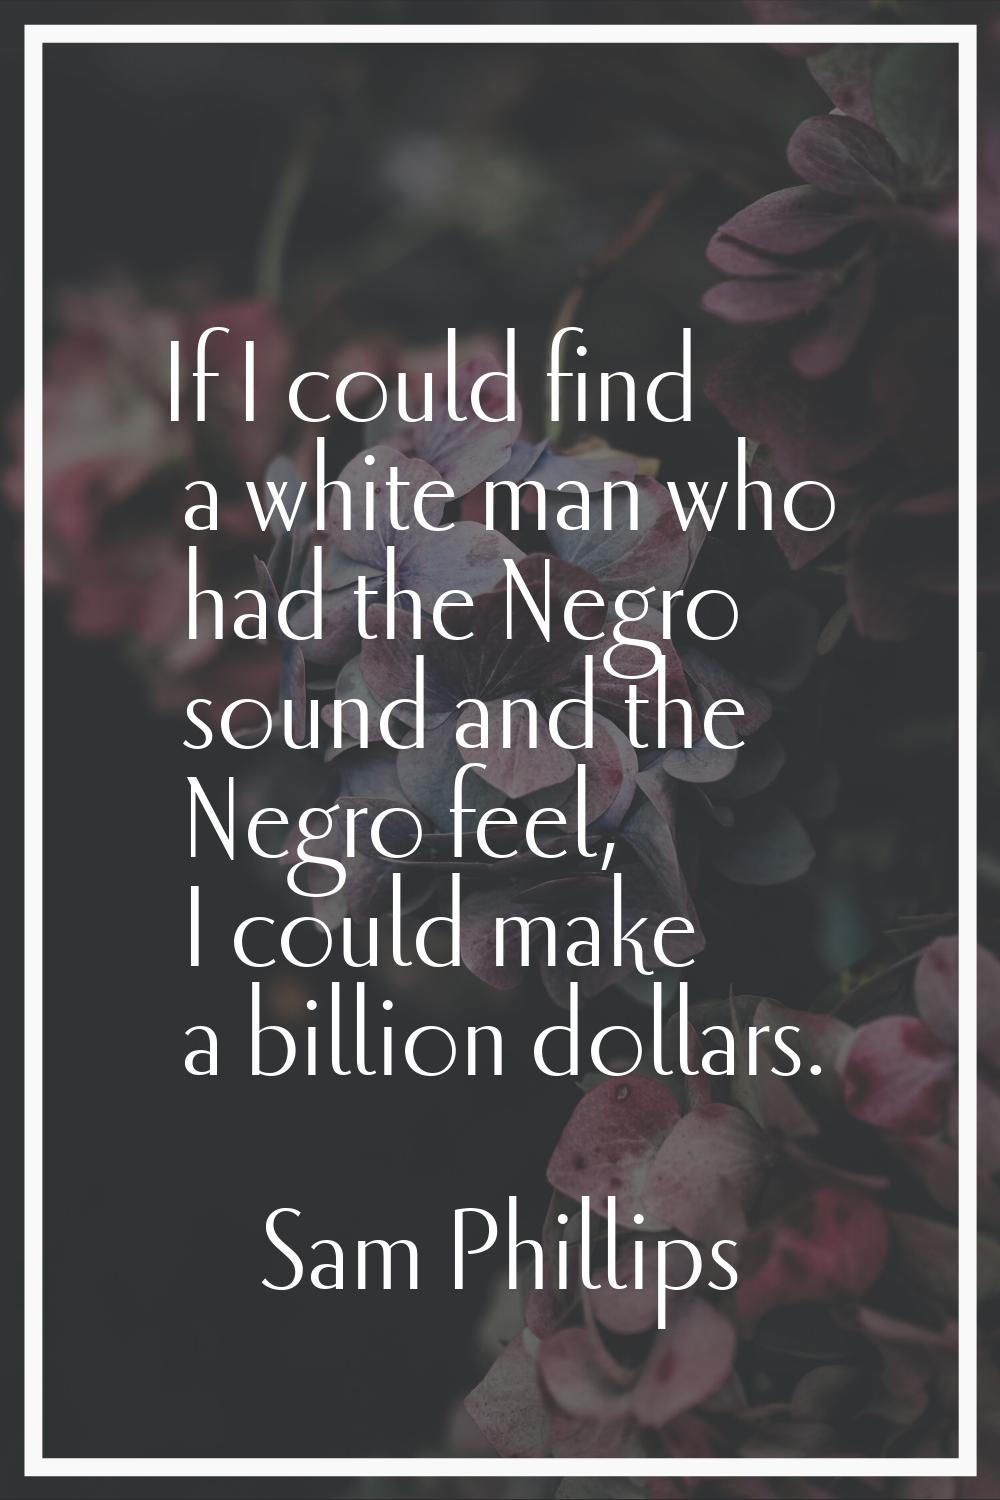 If I could find a white man who had the Negro sound and the Negro feel, I could make a billion doll